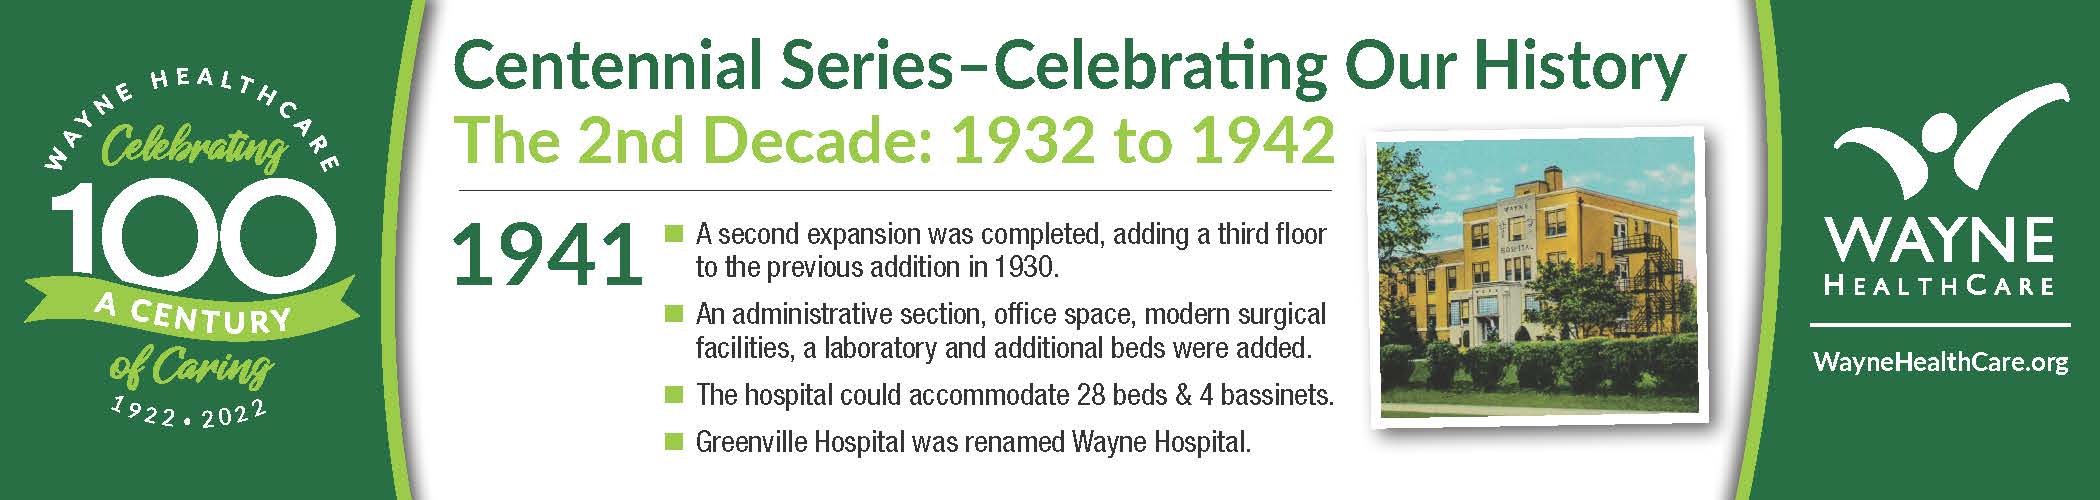 2nd Decade Centennial  information about Wayne HealthCare Picture with addition to hospital